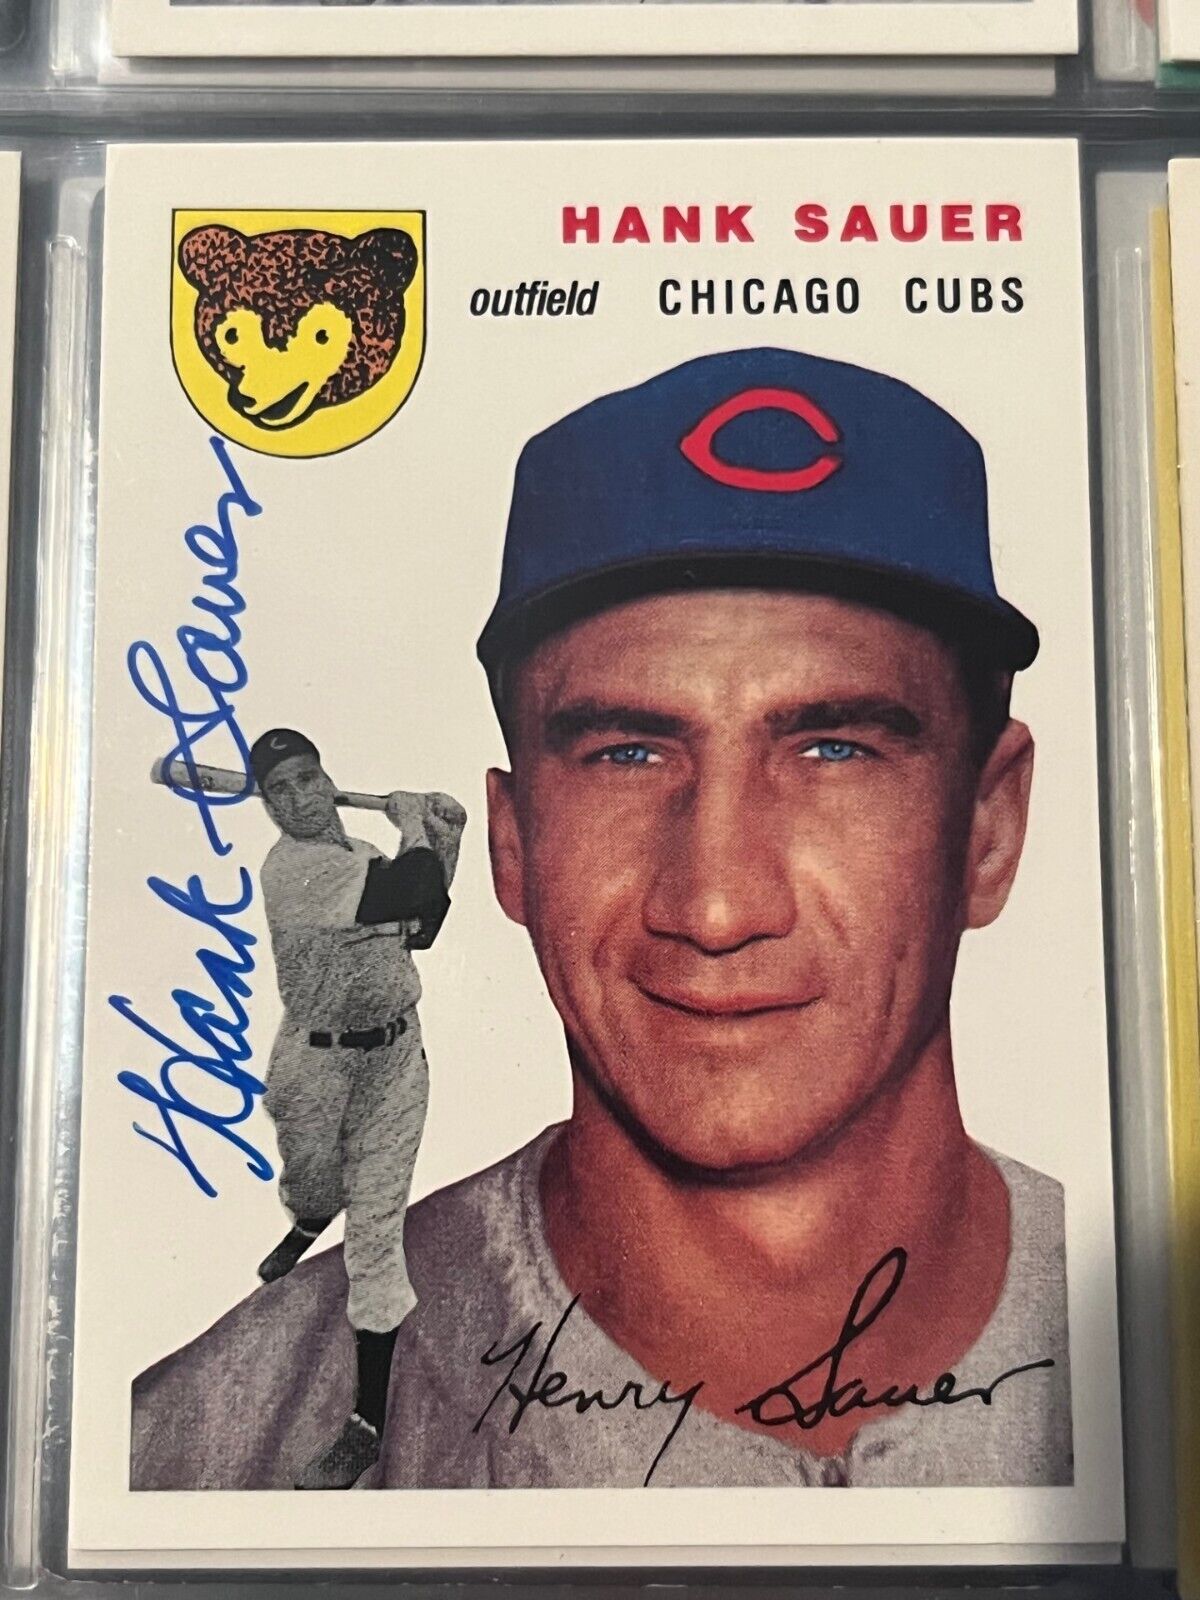 HANK SAUER signed Autographed Chicago Cubs 1954 Topps Archives Card #4